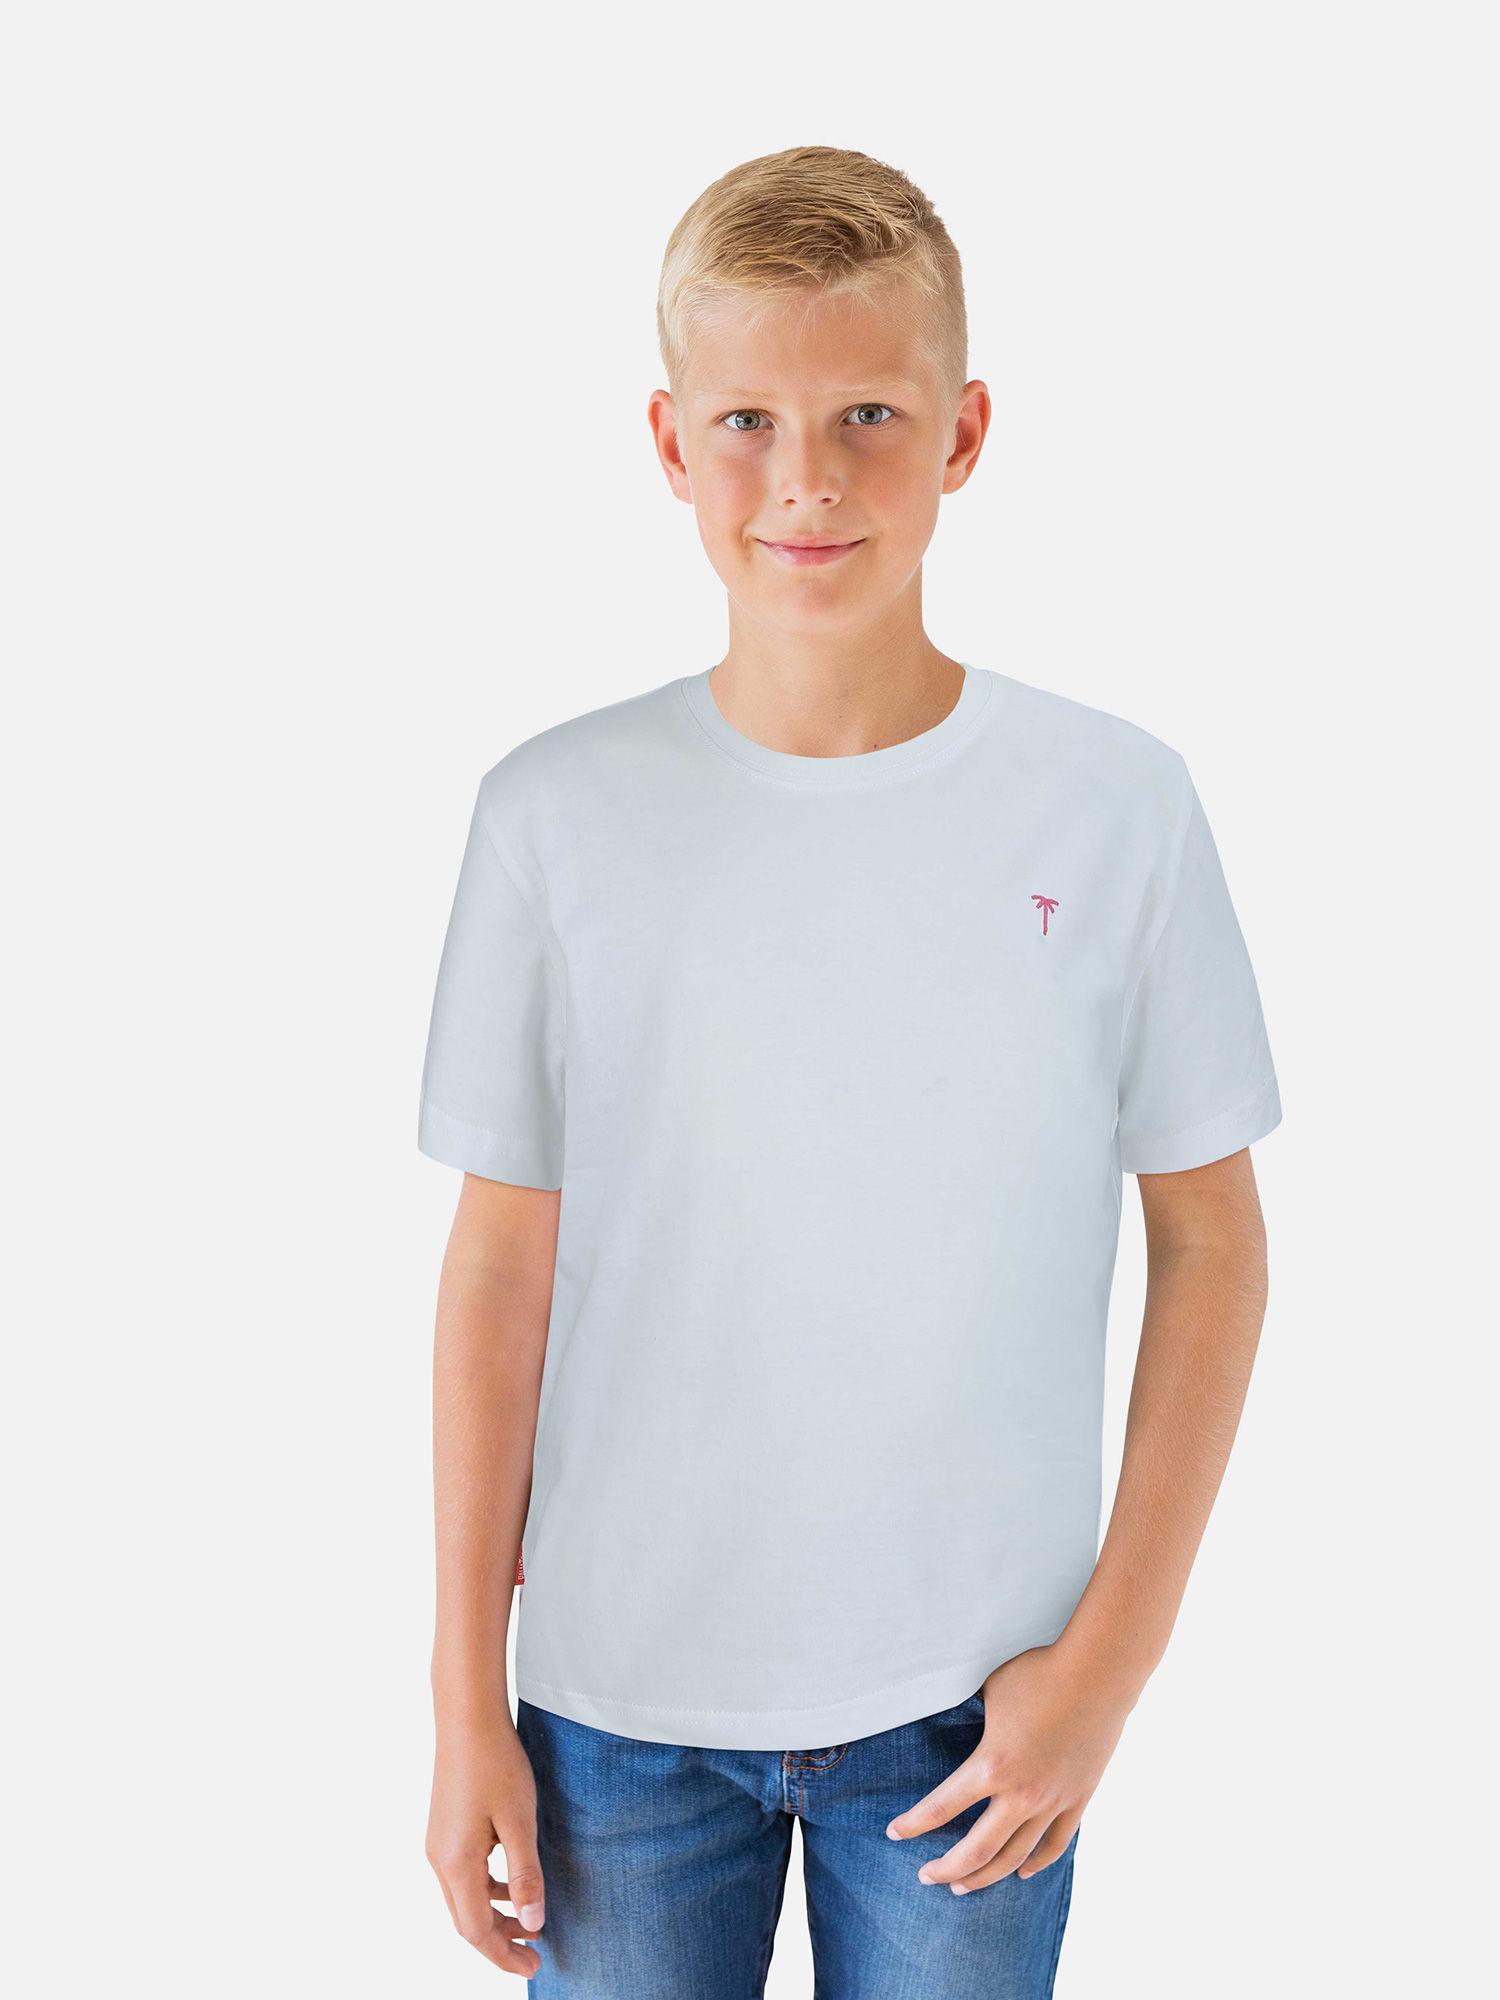 boys white cotton solid t-shirt half sleeves